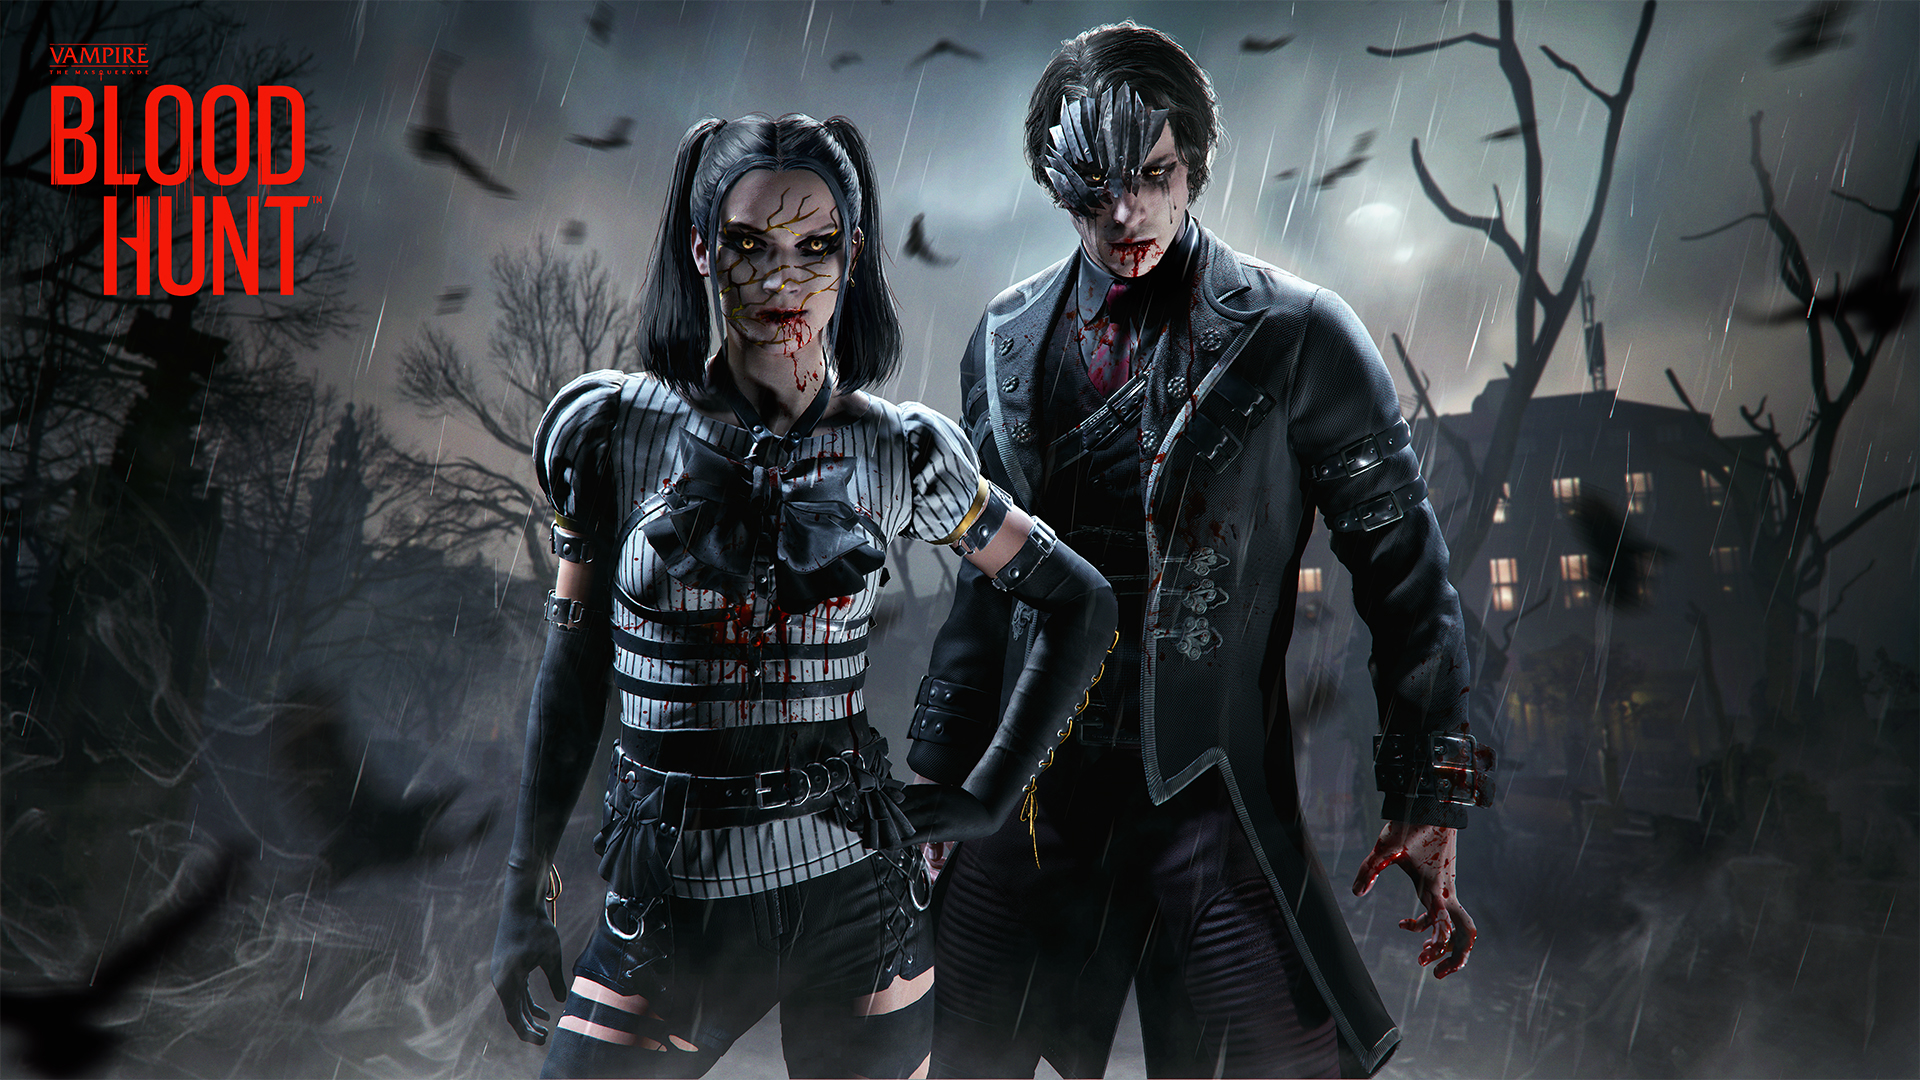 Bloodhunt on X: Time to get back into vertical vampire action in style!  Get our new seductive Noir Pass and bring out the gothic fashion all suited  for longer nights and shorter